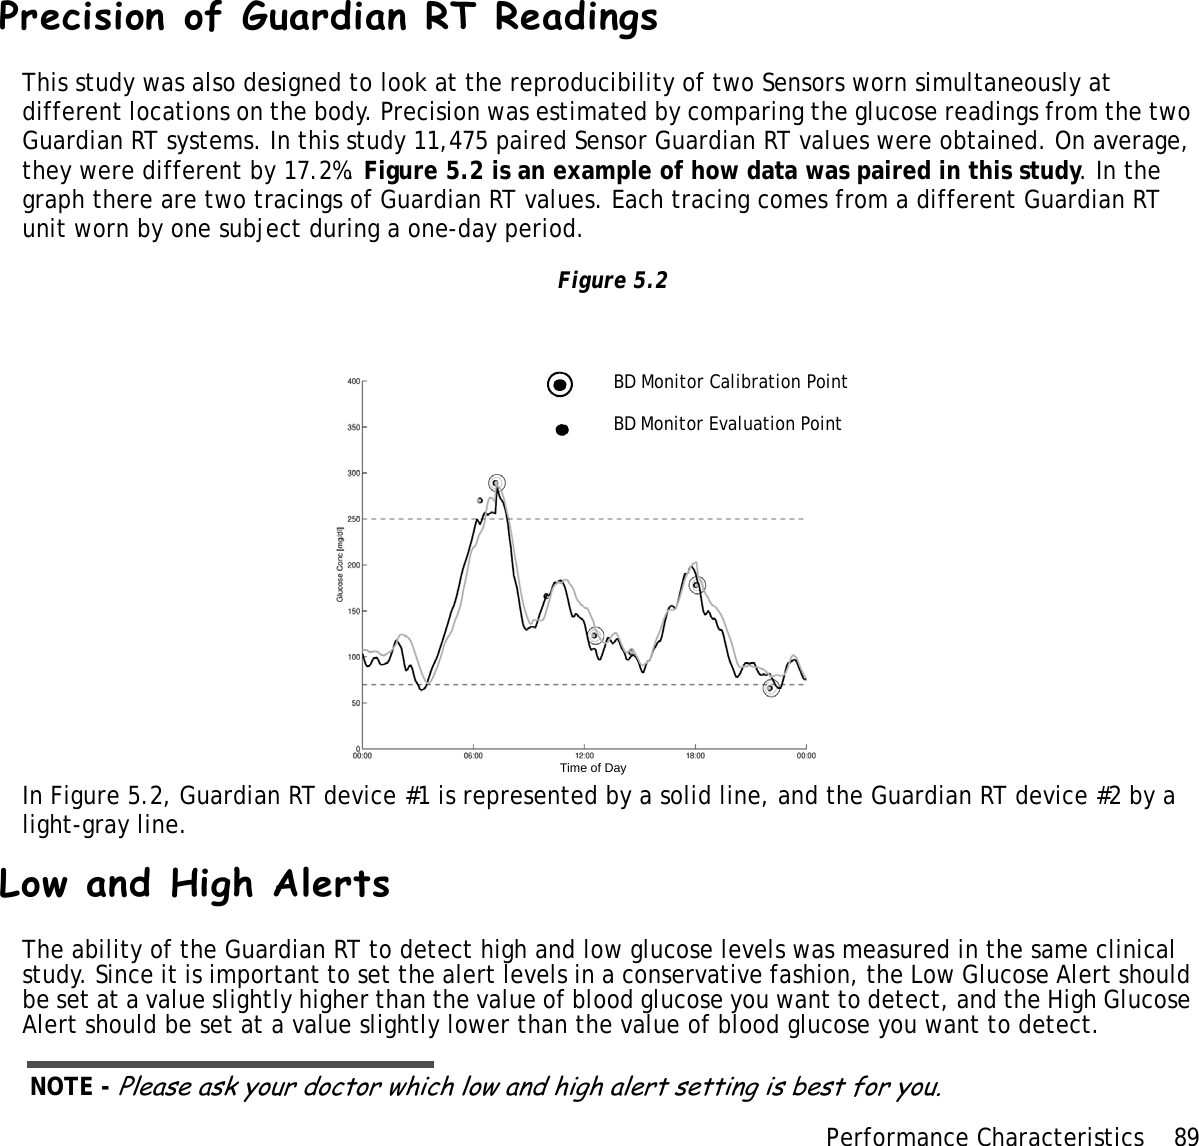 Performance Characteristics 89 Precision of Guardian RT ReadingsThis study was also designed to look at the reproducibility of two Sensors worn simultaneously at different locations on the body. Precision was estimated by comparing the glucose readings from the two Guardian RT systems. In this study 11,475 paired Sensor Guardian RT values were obtained. On average, they were different by 17.2%. Figure 5.2 is an example of how data was paired in this study. In the graph there are two tracings of Guardian RT values. Each tracing comes from a different Guardian RT unit worn by one subject during a one-day period. Figure 5.2In Figure 5.2, Guardian RT device #1 is represented by a solid line, and the Guardian RT device #2 by a light-gray line.Low and High AlertsThe ability of the Guardian RT to detect high and low glucose levels was measured in the same clinical study. Since it is important to set the alert levels in a conservative fashion, the Low Glucose Alert should be set at a value slightly higher than the value of blood glucose you want to detect, and the High Glucose Alert should be set at a value slightly lower than the value of blood glucose you want to detect.NOTE - Please ask your doctor which low and high alert setting is best for you.BD Monitor Calibration PointBD Monitor Evaluation PointTime of Day